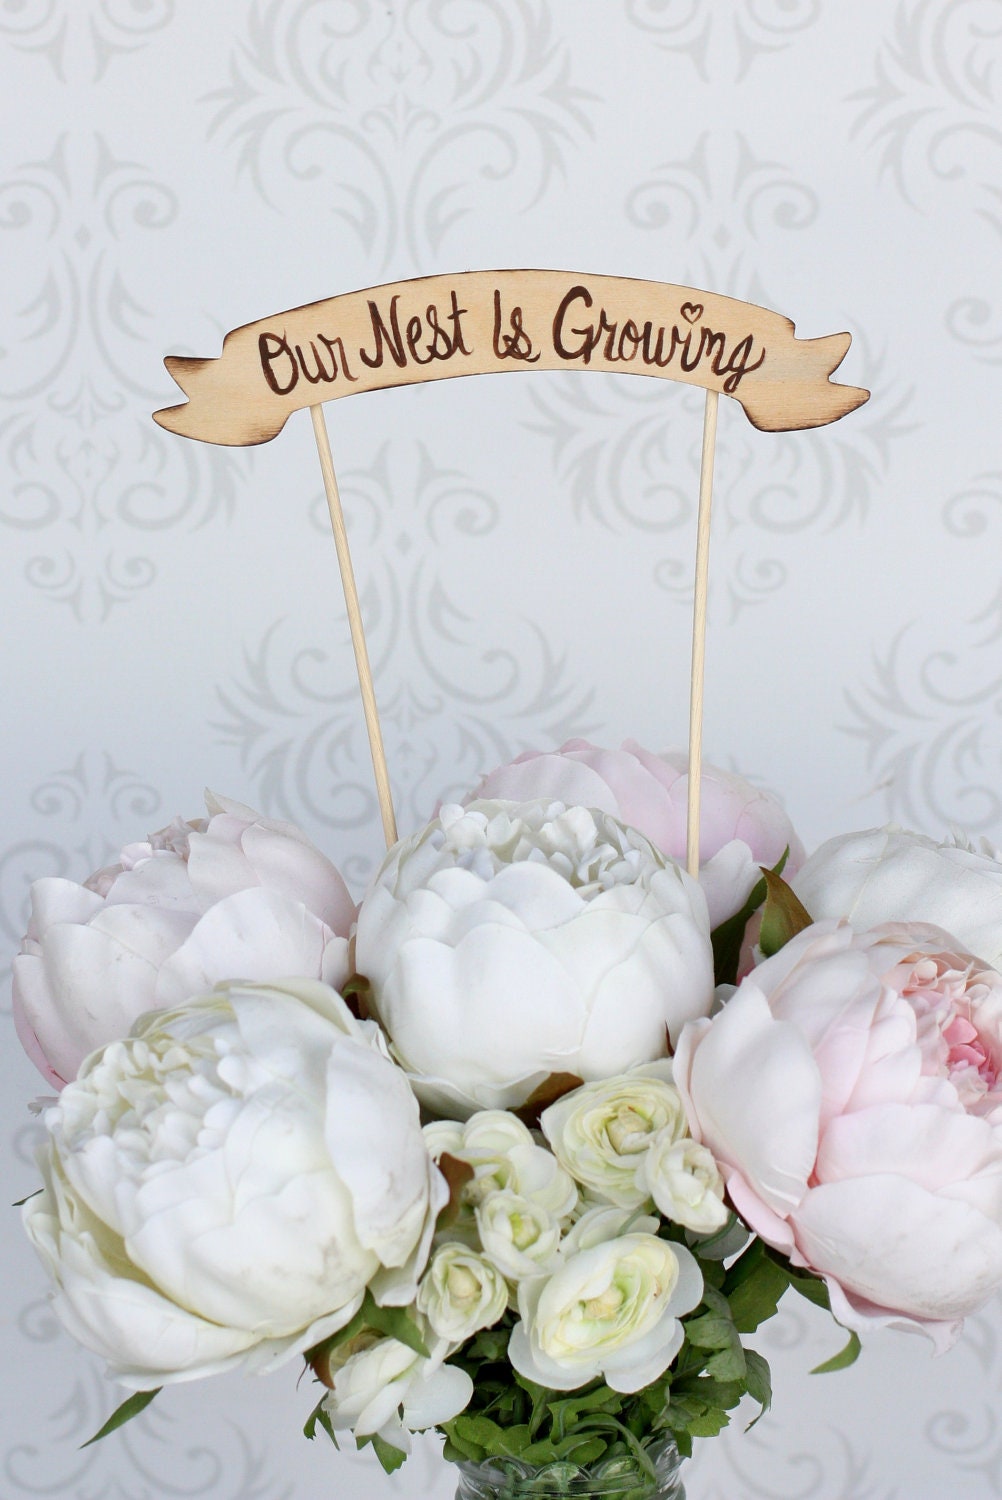 Baby Shower Cake Topper Rustic Chic Party (item P10562)